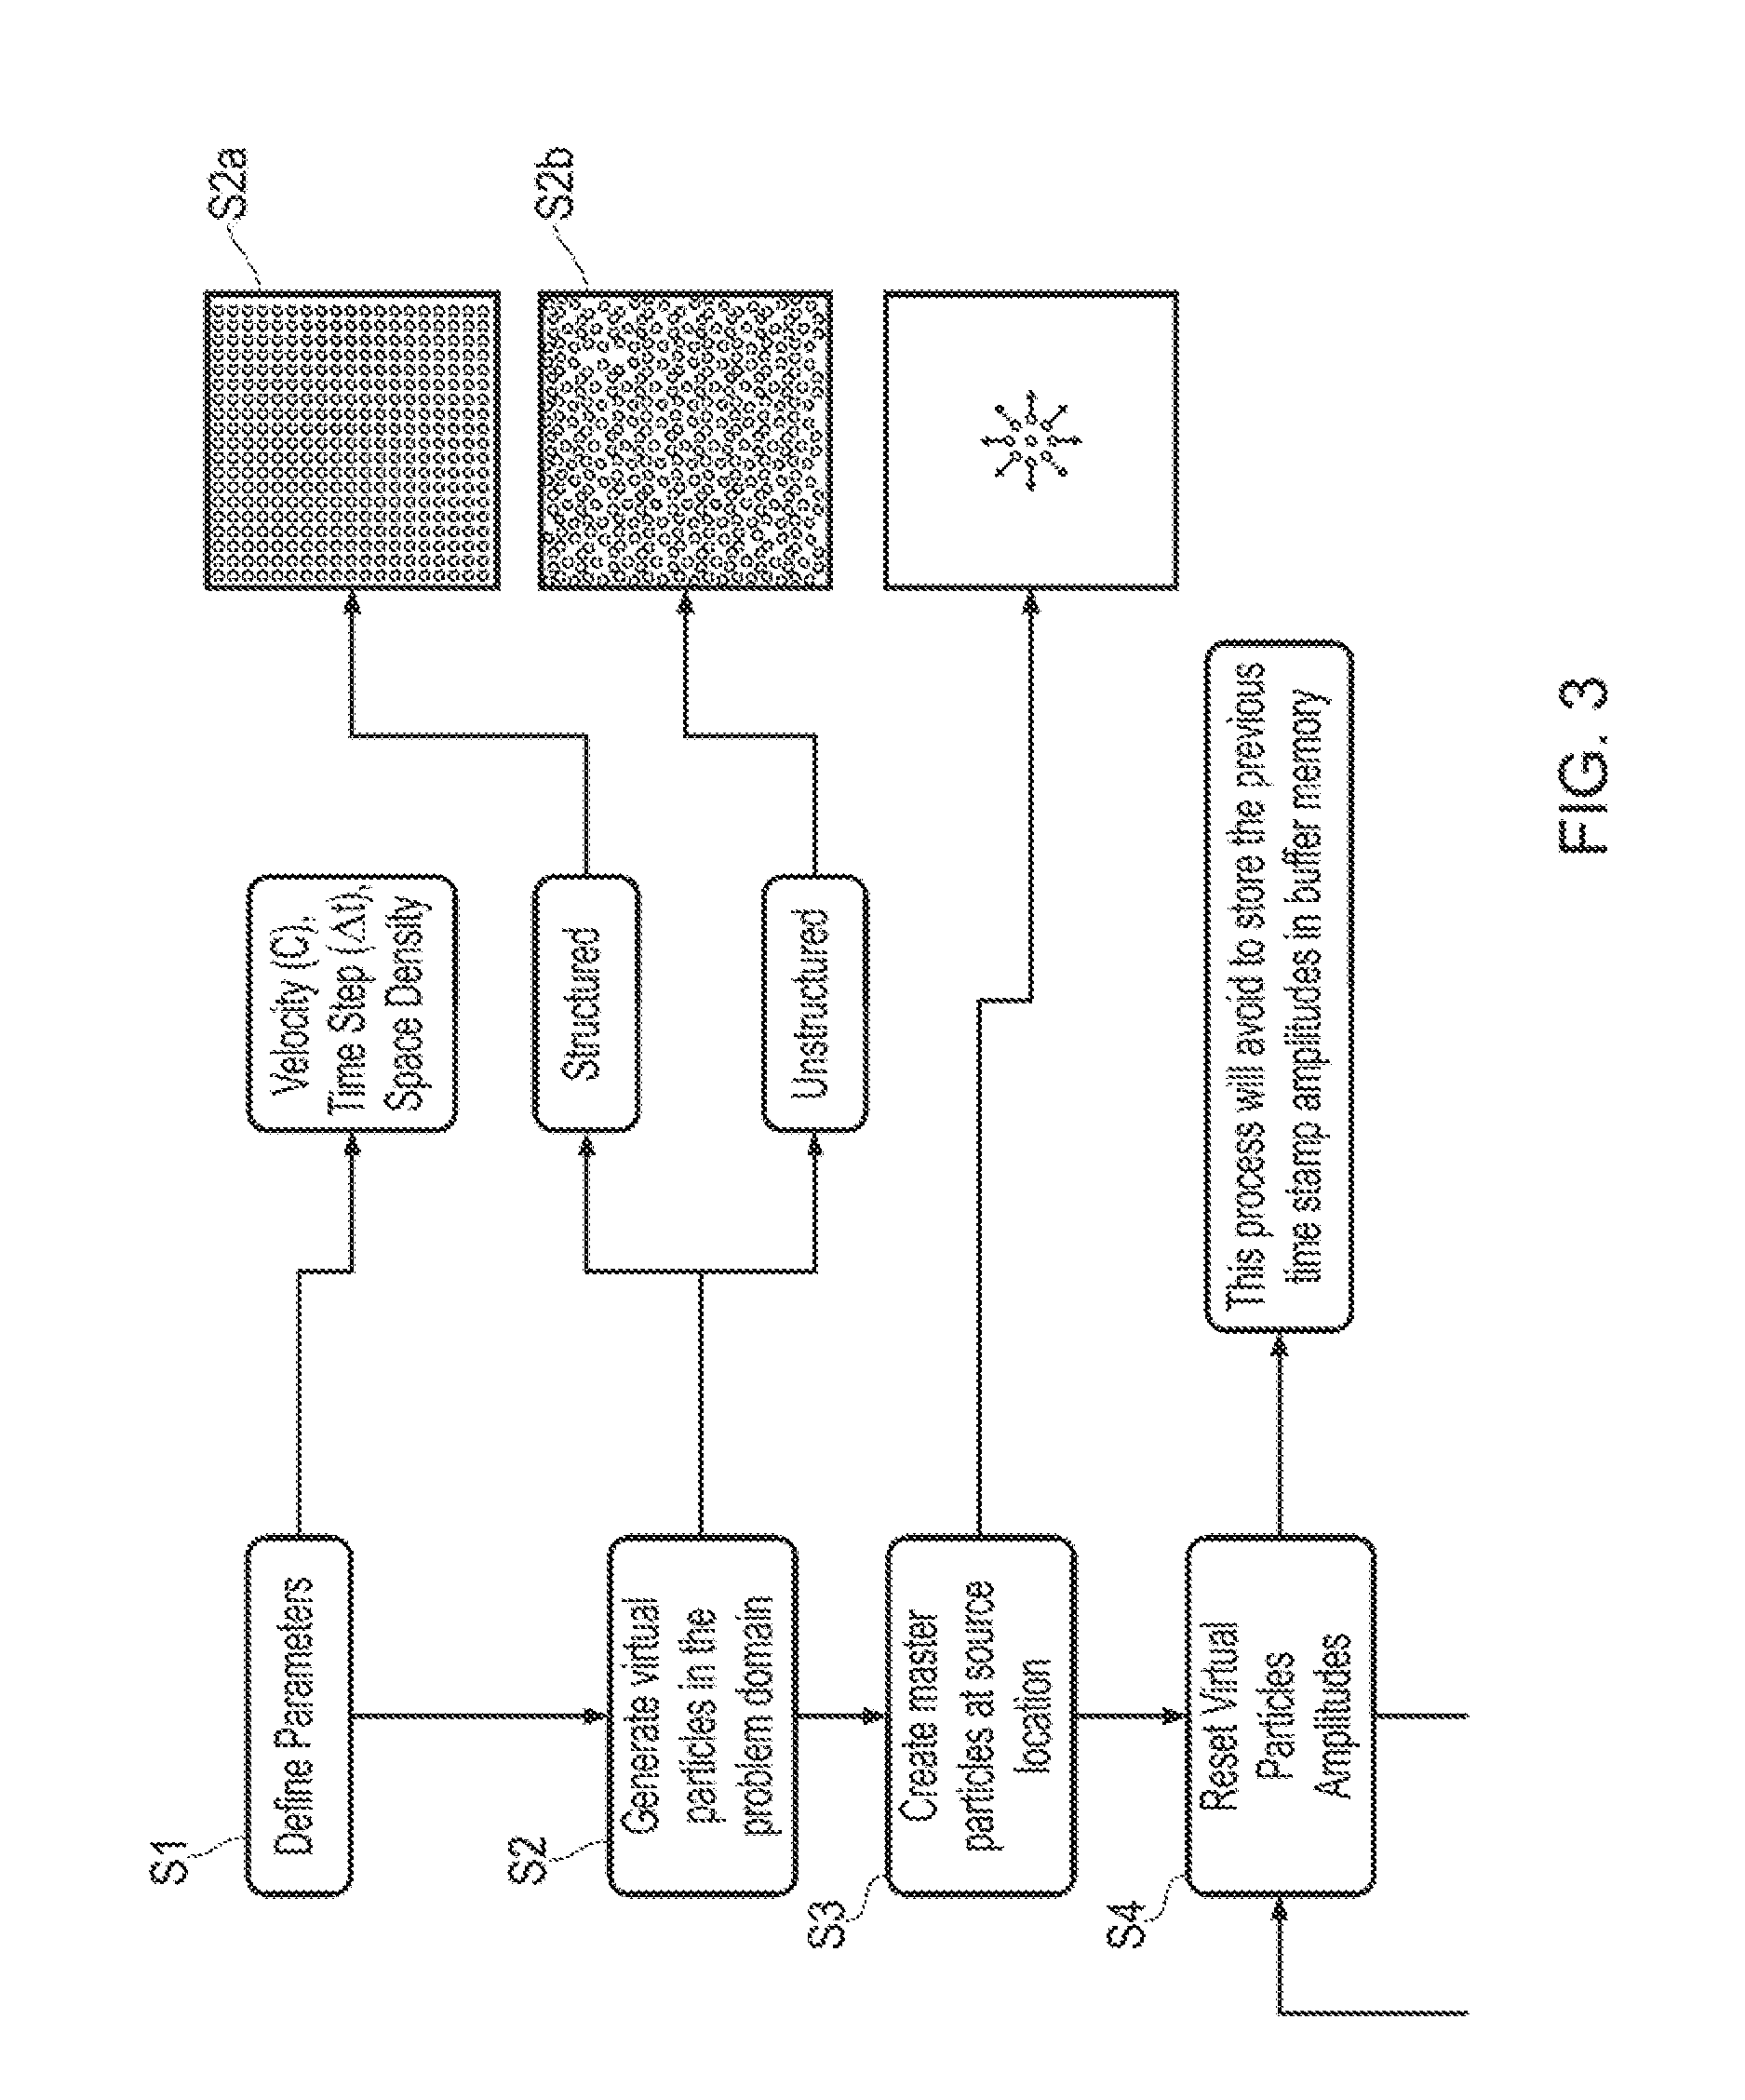 Method of determining the magnitude of a field variable of an energy wave